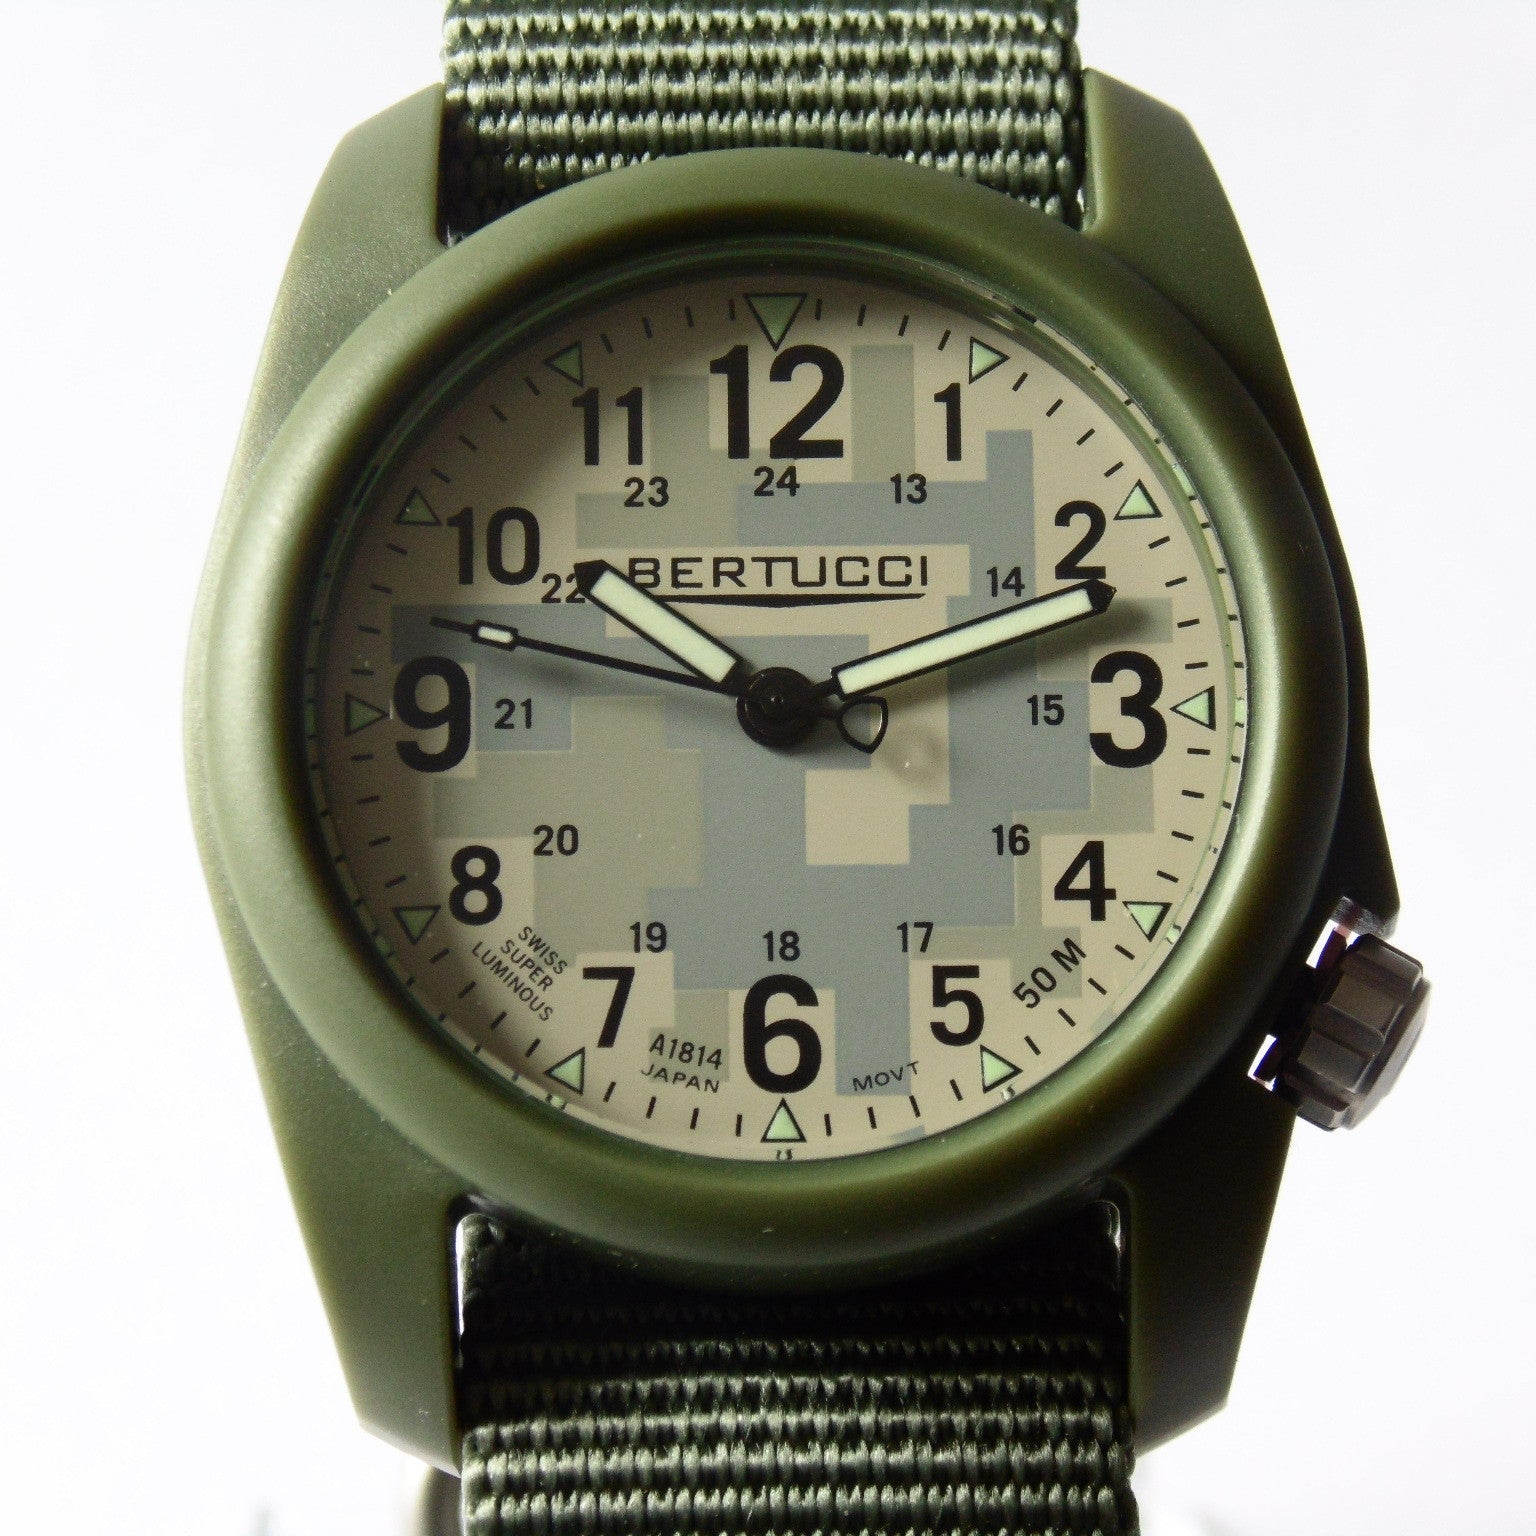 Bertucci DX3 Field Resin Watch, Olive Drab Nylon Strap, Digicam Camouflage Dial 11032 - Watchfinder General - UK suppliers of Russian Vostok Parnis Watches MWC G10
 - 2